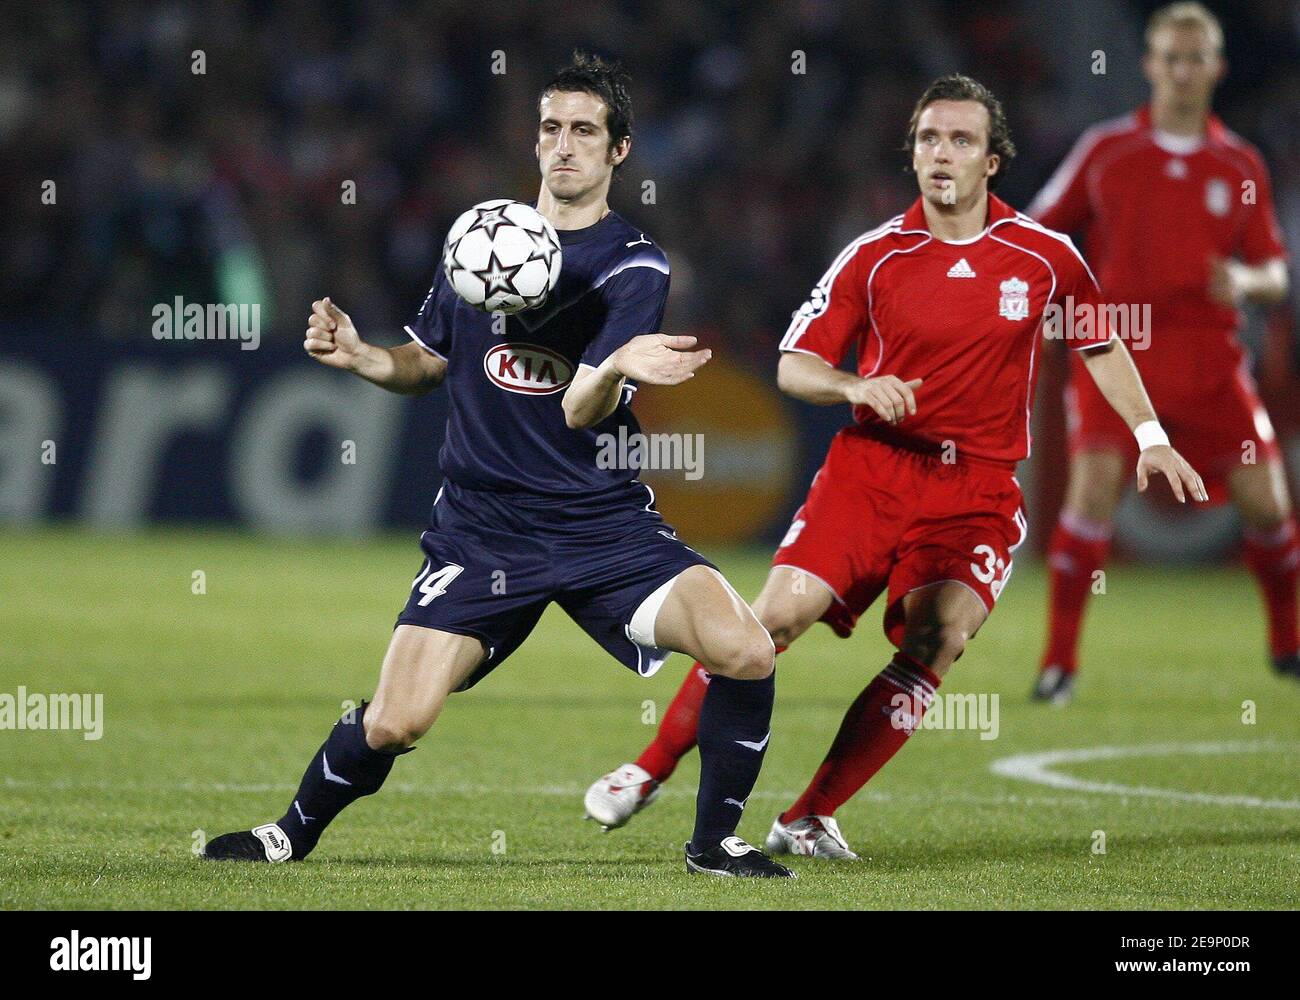 Bordeaux' Johan Micoud controls the ball during the UEFA Champions League, Group C, Girondins de Bordeaux vs Liverpool FC at the Stade Chaban-Delmas in Bordeaux, France on October 18, 2006. Liverpool won 1-0. Photo by Christian Liewig/ABACAPRESS.COM Stock Photo